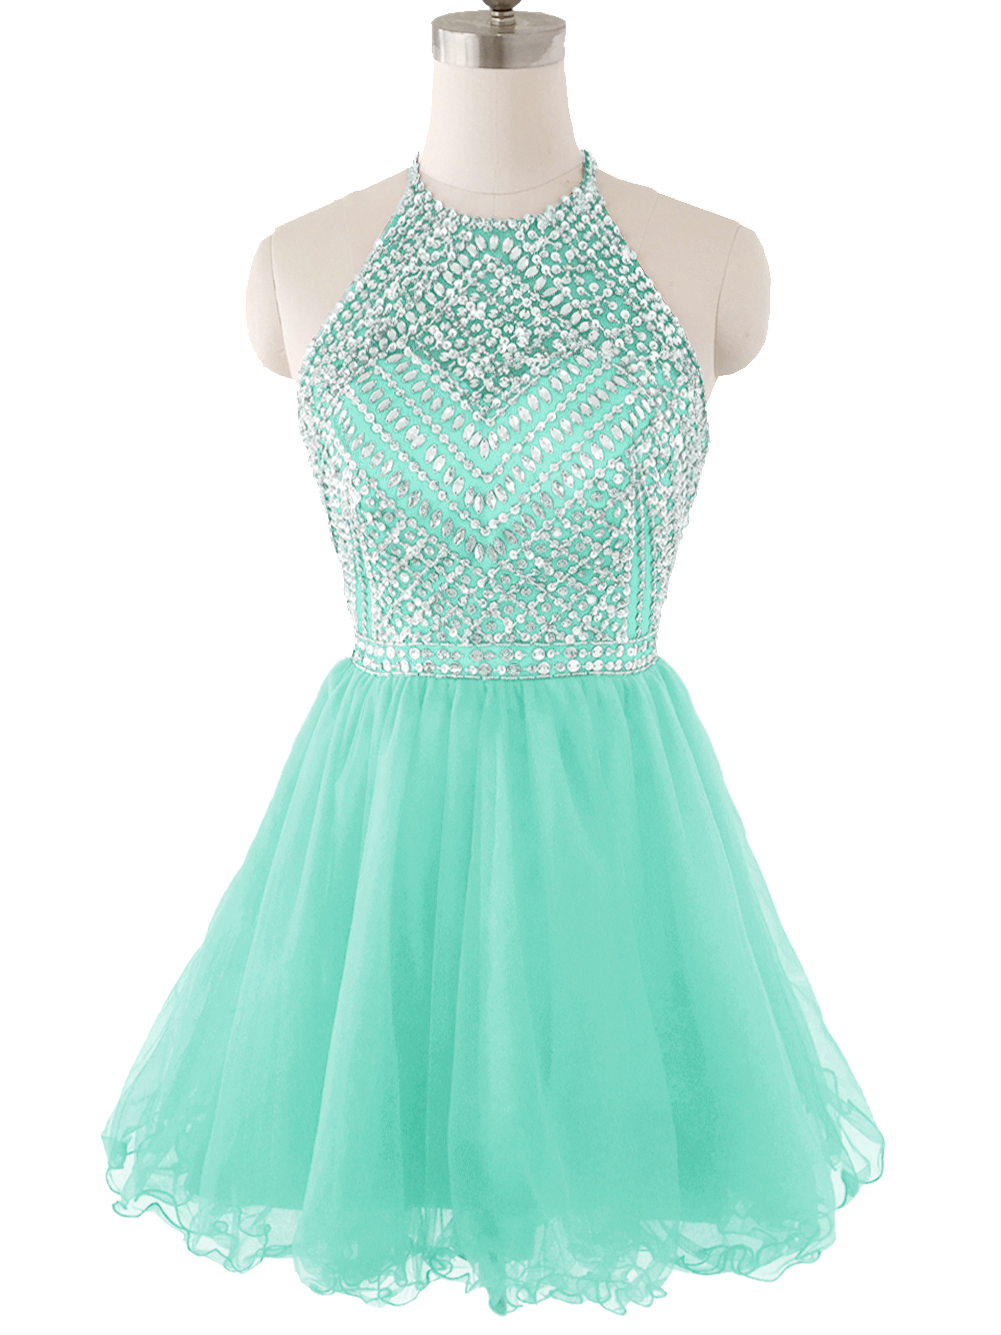 

Short Prom Party Dresses Homecoming Gown A Line Sheer Neck Tulle Backless Mint Lalic Red Truqoise Pleats Beads Crystals Party Cocktail, Green